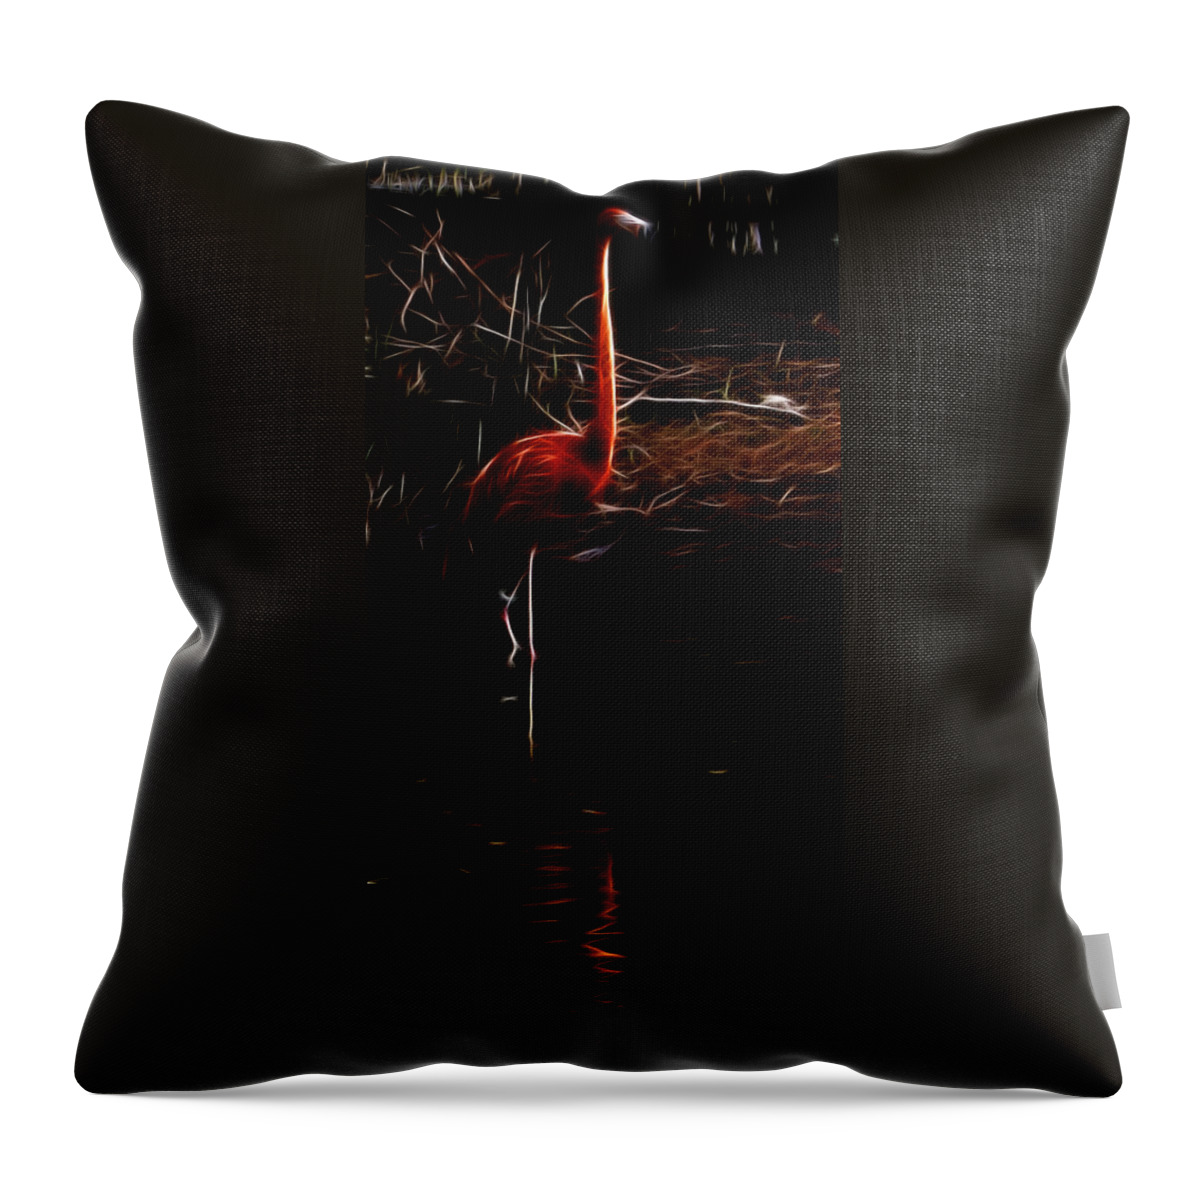 Fire Flamingo Throw Pillow featuring the photograph Fire Flamingo by Weston Westmoreland